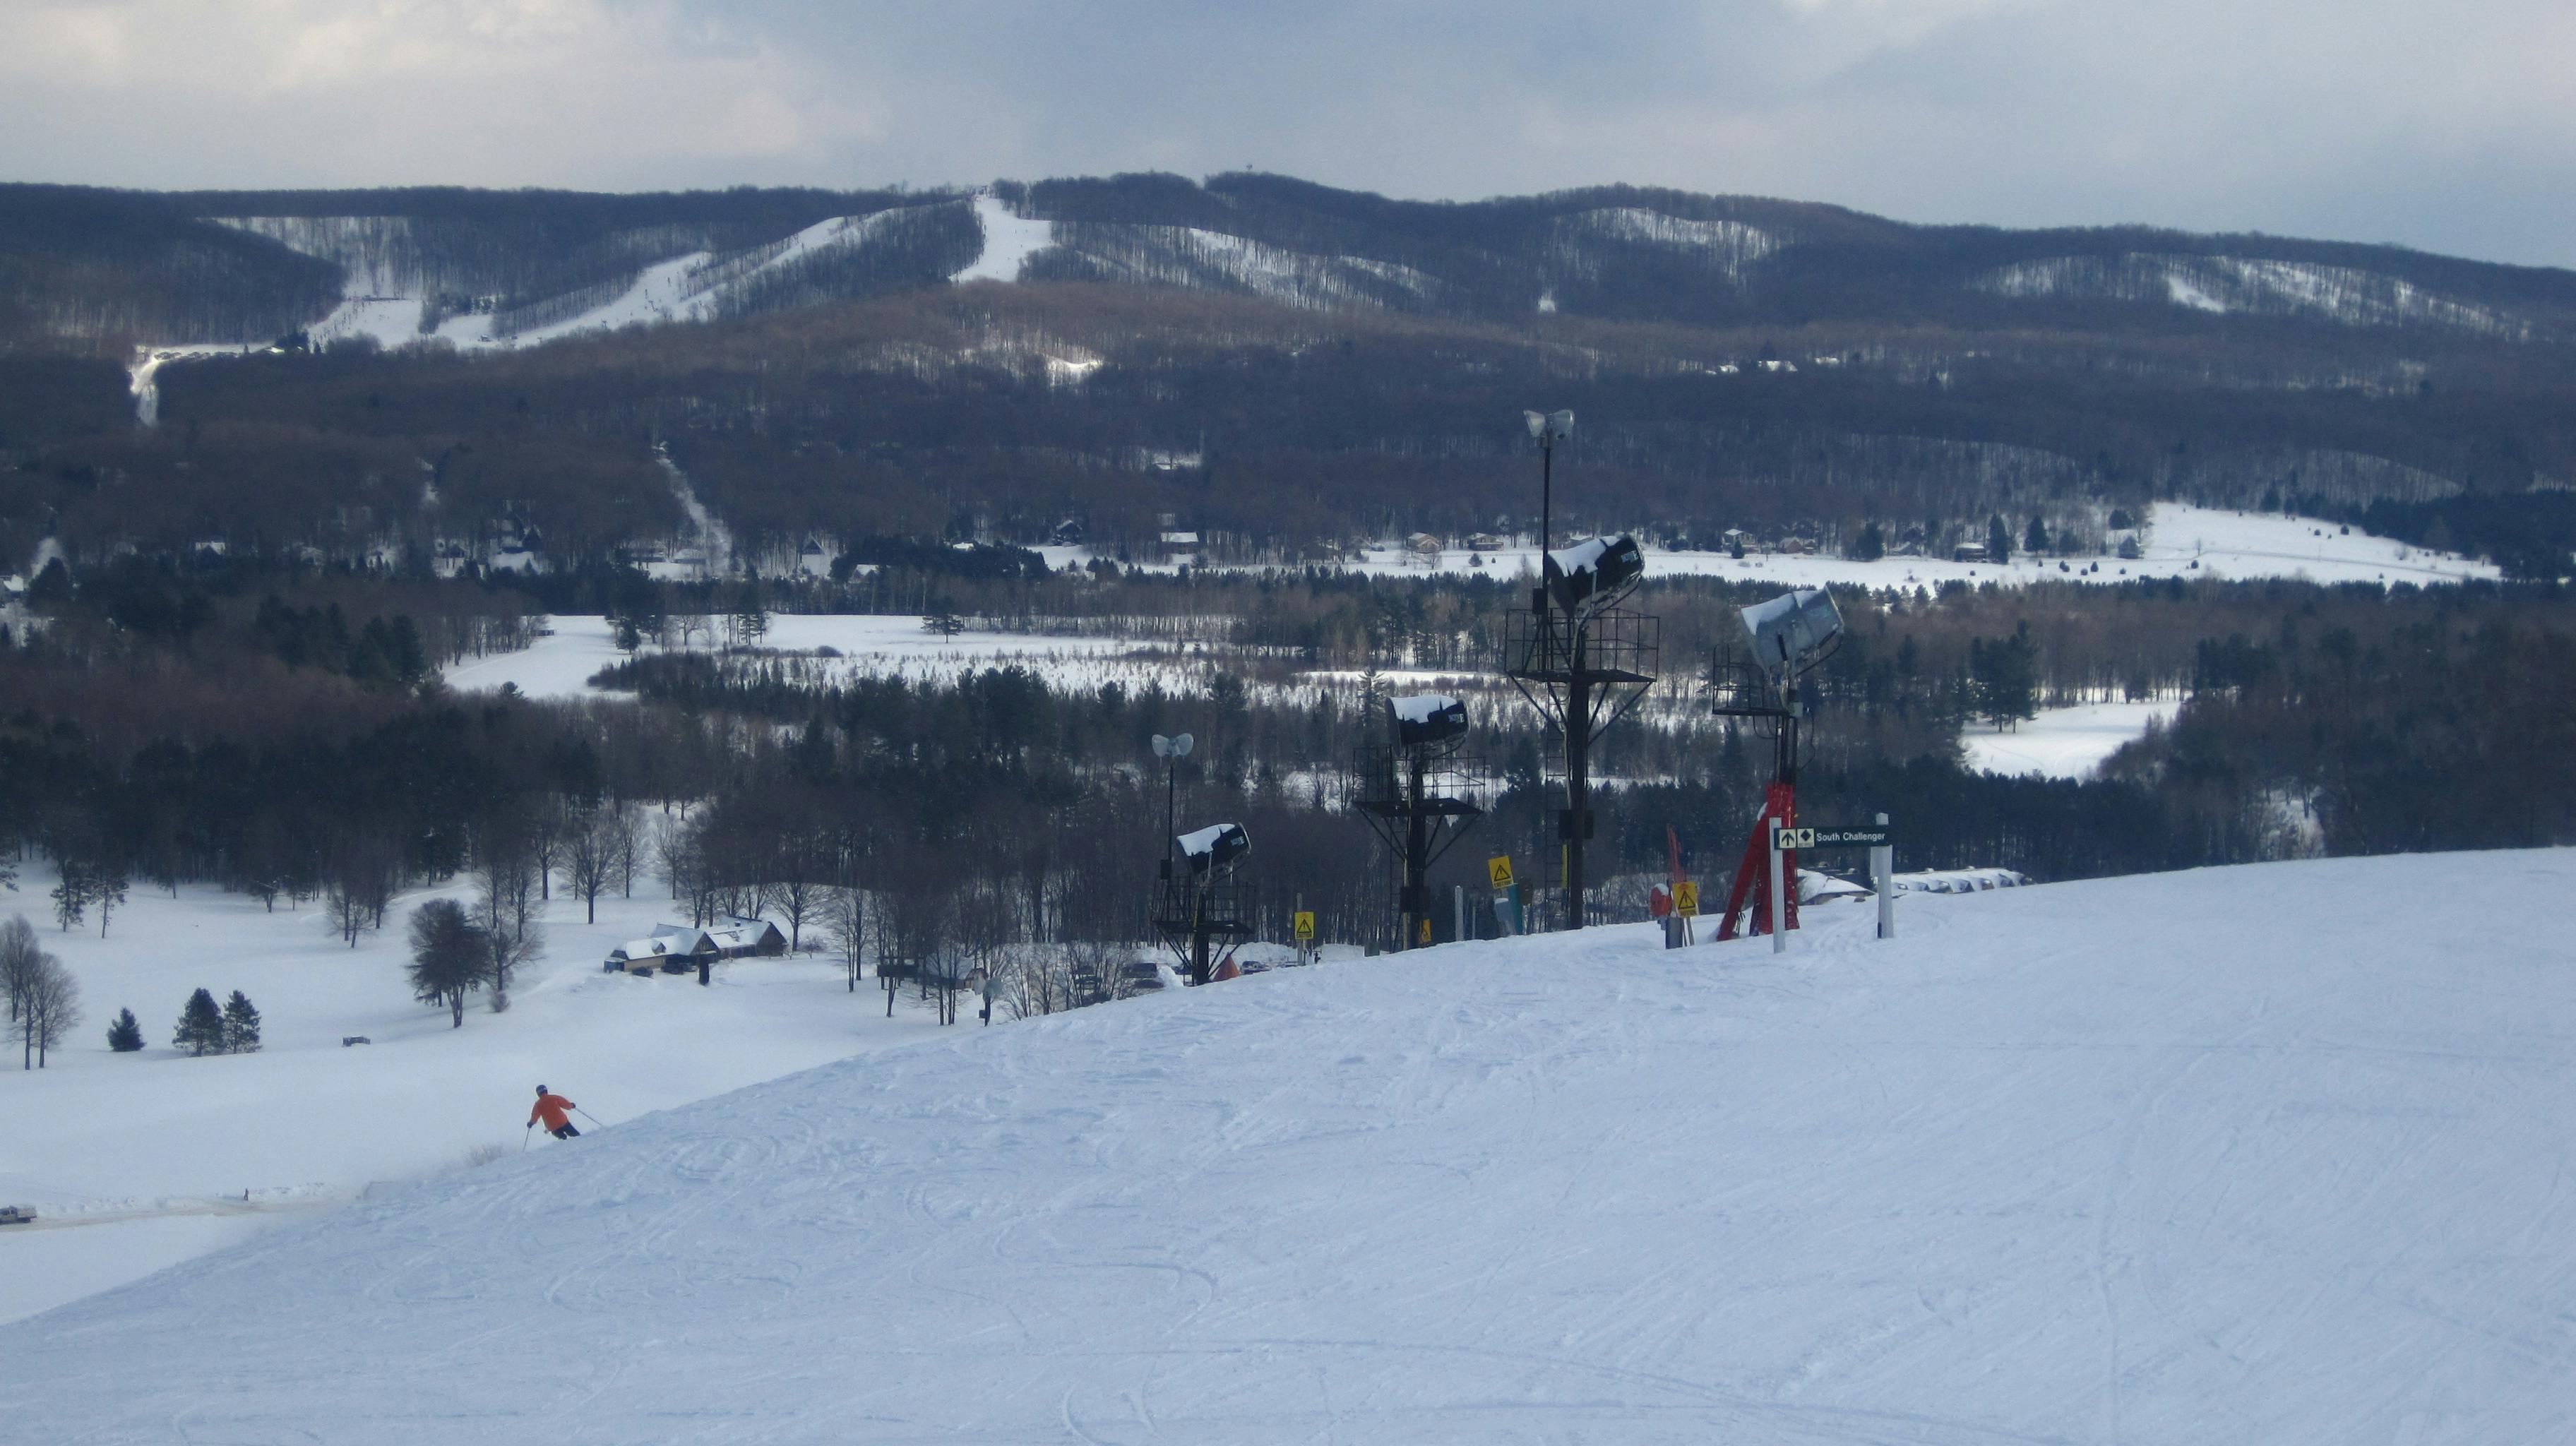 View of a ski area. 